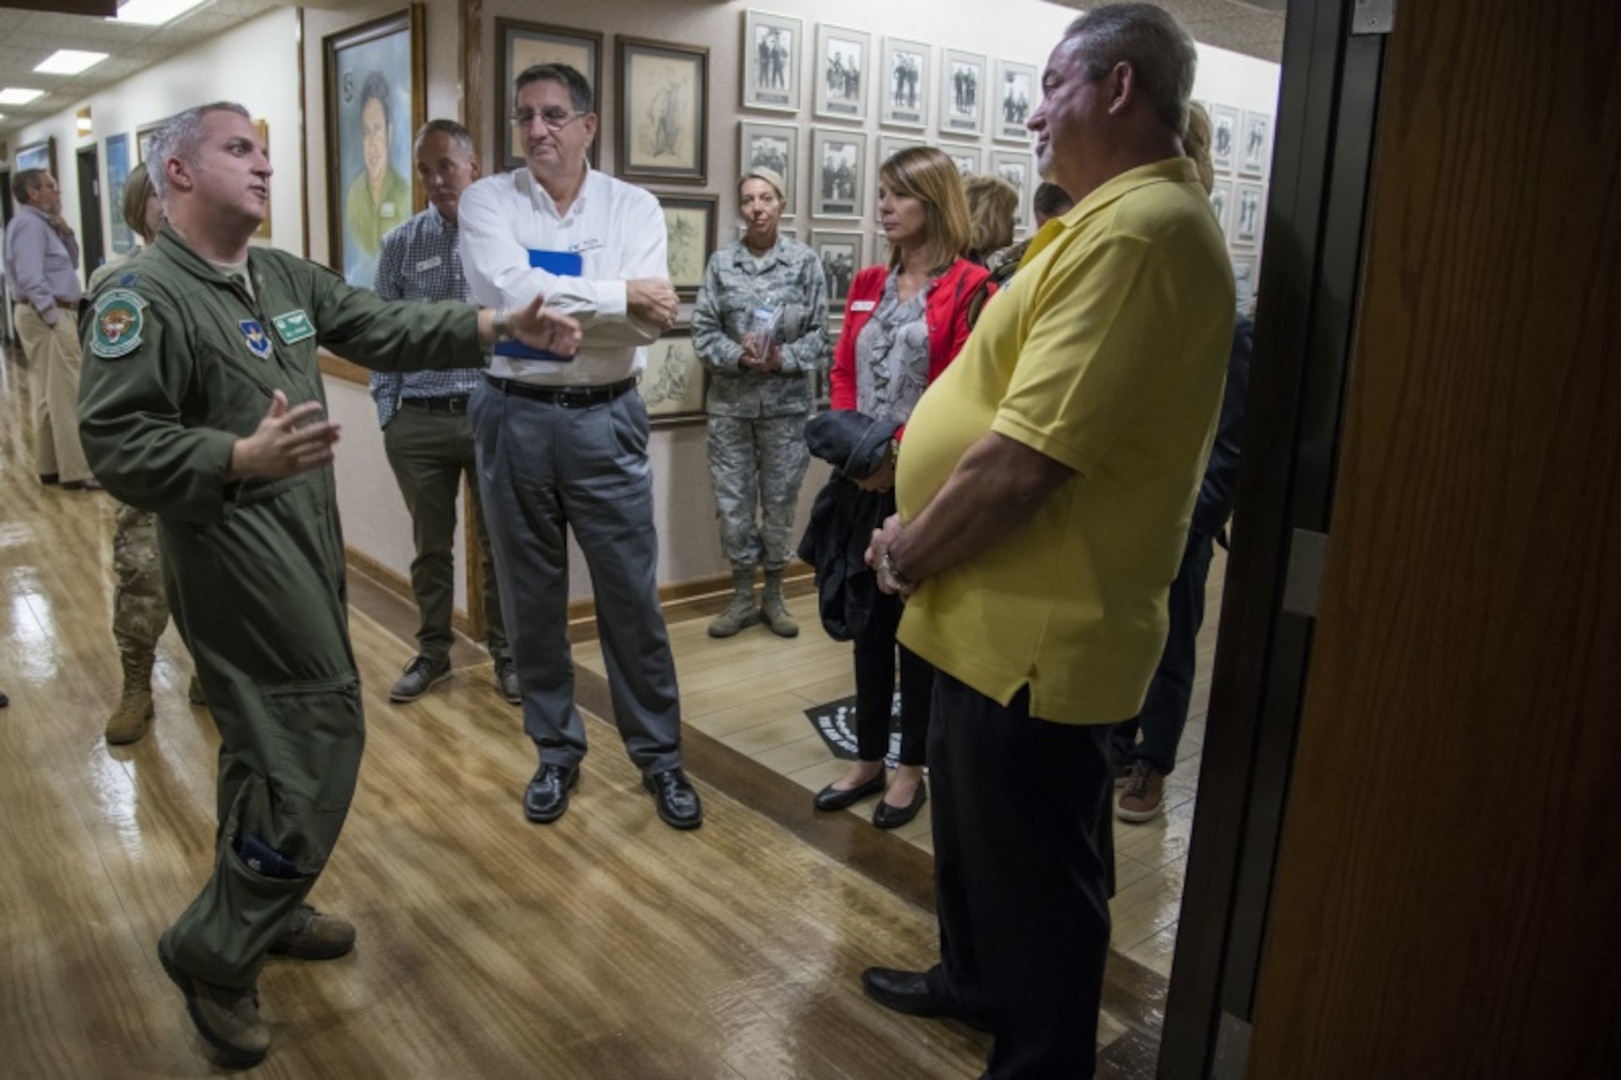 U.S. Air Force Lt. Col. Bill Johnson, 560th Flying Training Squadron commander, speaks to civic leaders about his unit’s mission Nov. 6, 2019. During the visit, civic leaders toured missions of 37th Training Wing, 12th Flying Training Wing, 502nd Air Base Wing and Air Force Recruiting Service, all at Joint Base San Antonio locations. The Air Force Civic Leader Tour Program helps community leaders understand and advocate for the Air Force’s diverse missions.